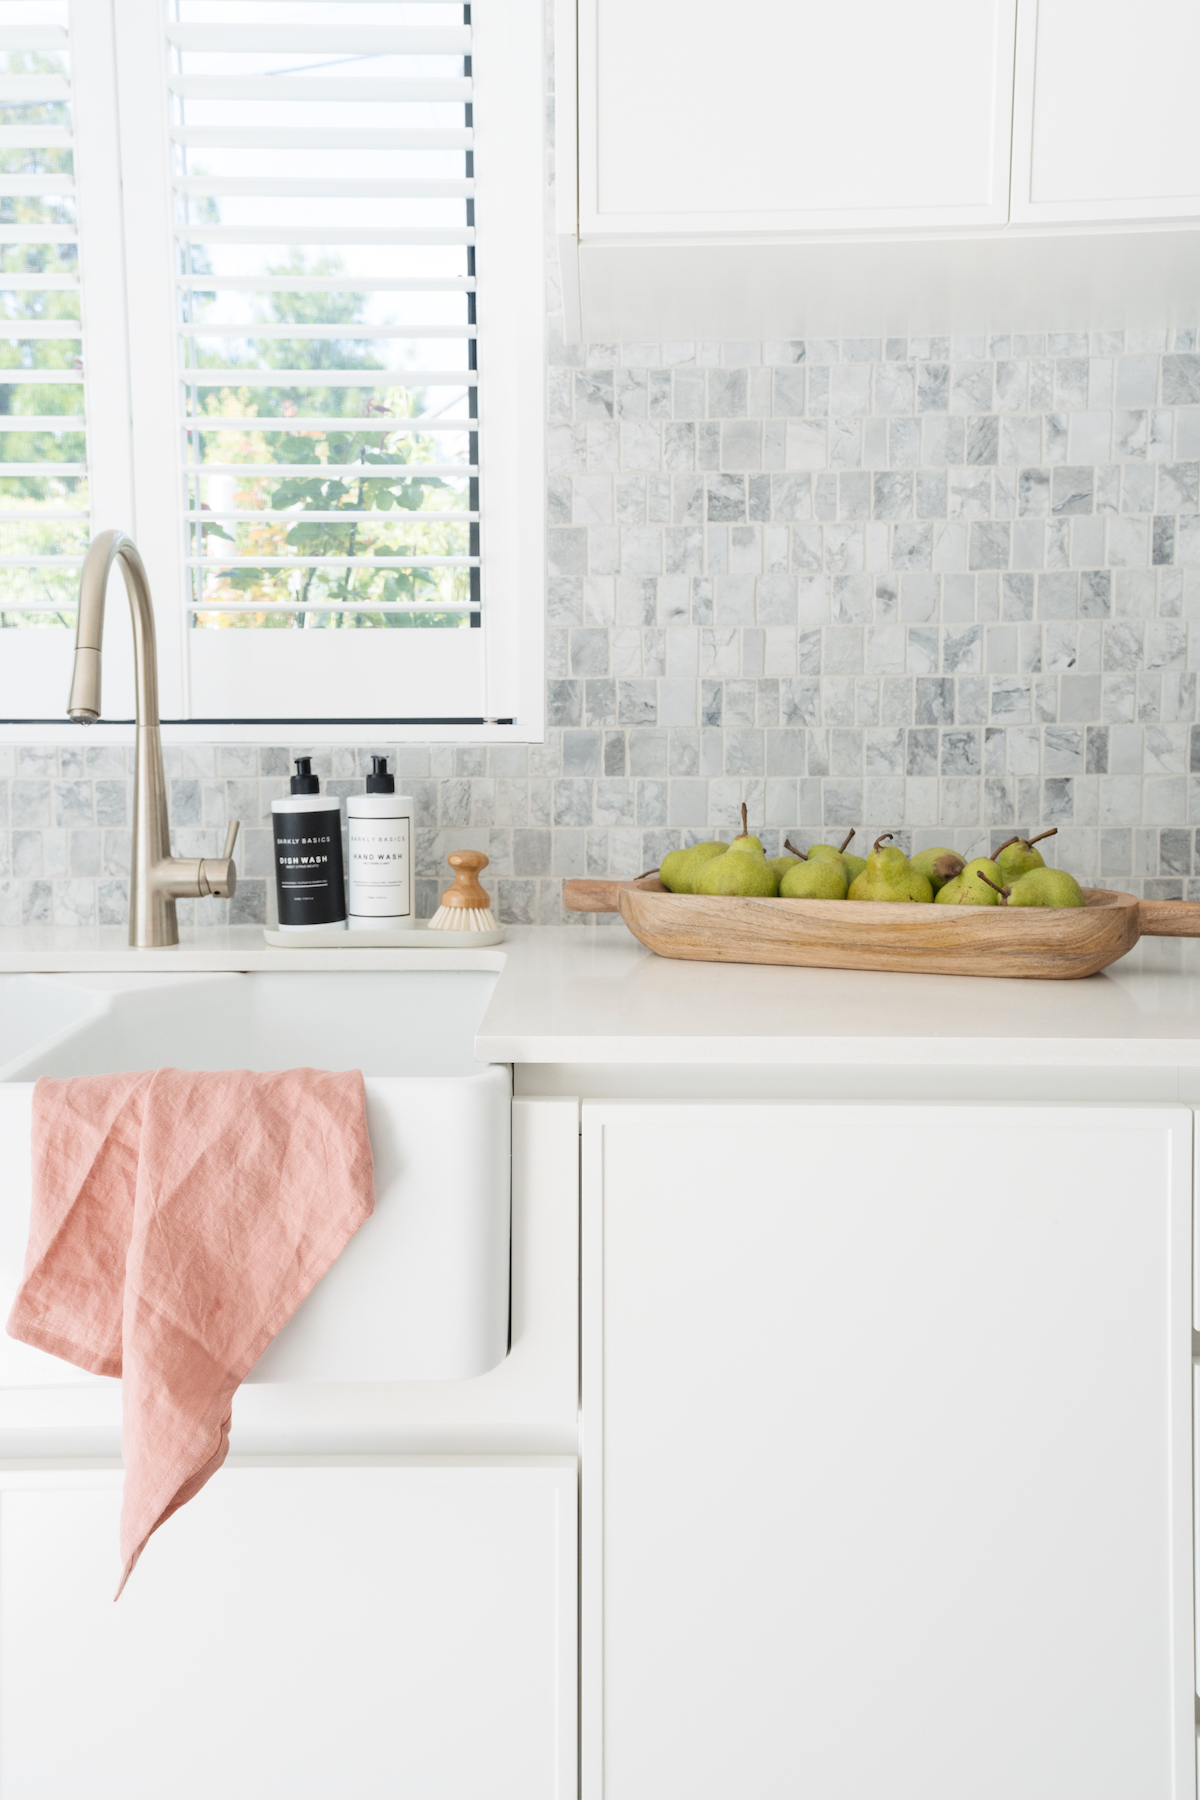 Tea towel draped over kitchen sink is one of the great ways to style your kitchen